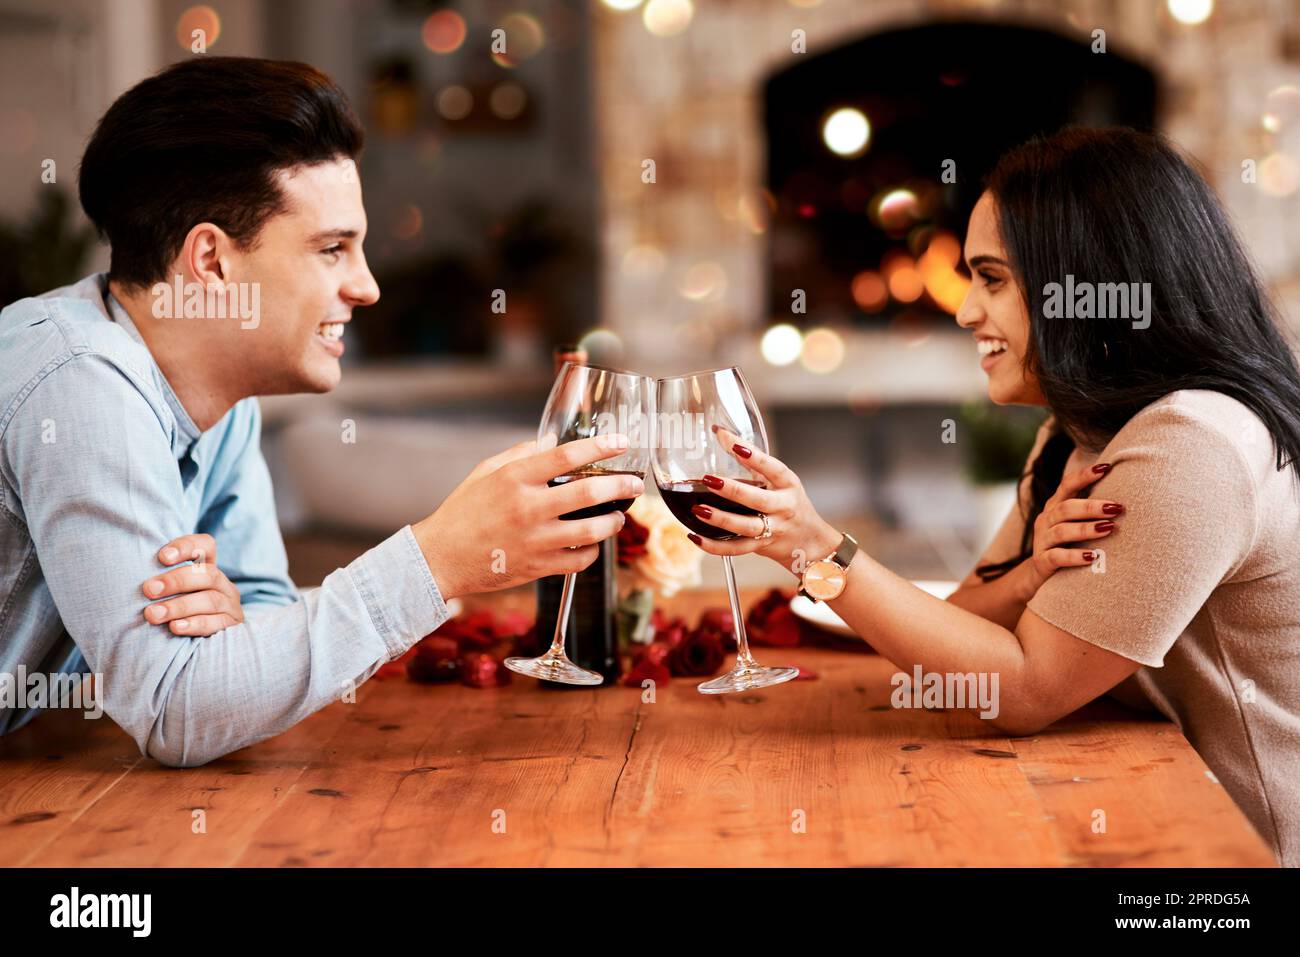 Cheers to the person I want to grow old with. a young couple having a romantic evening at home. Stock Photo